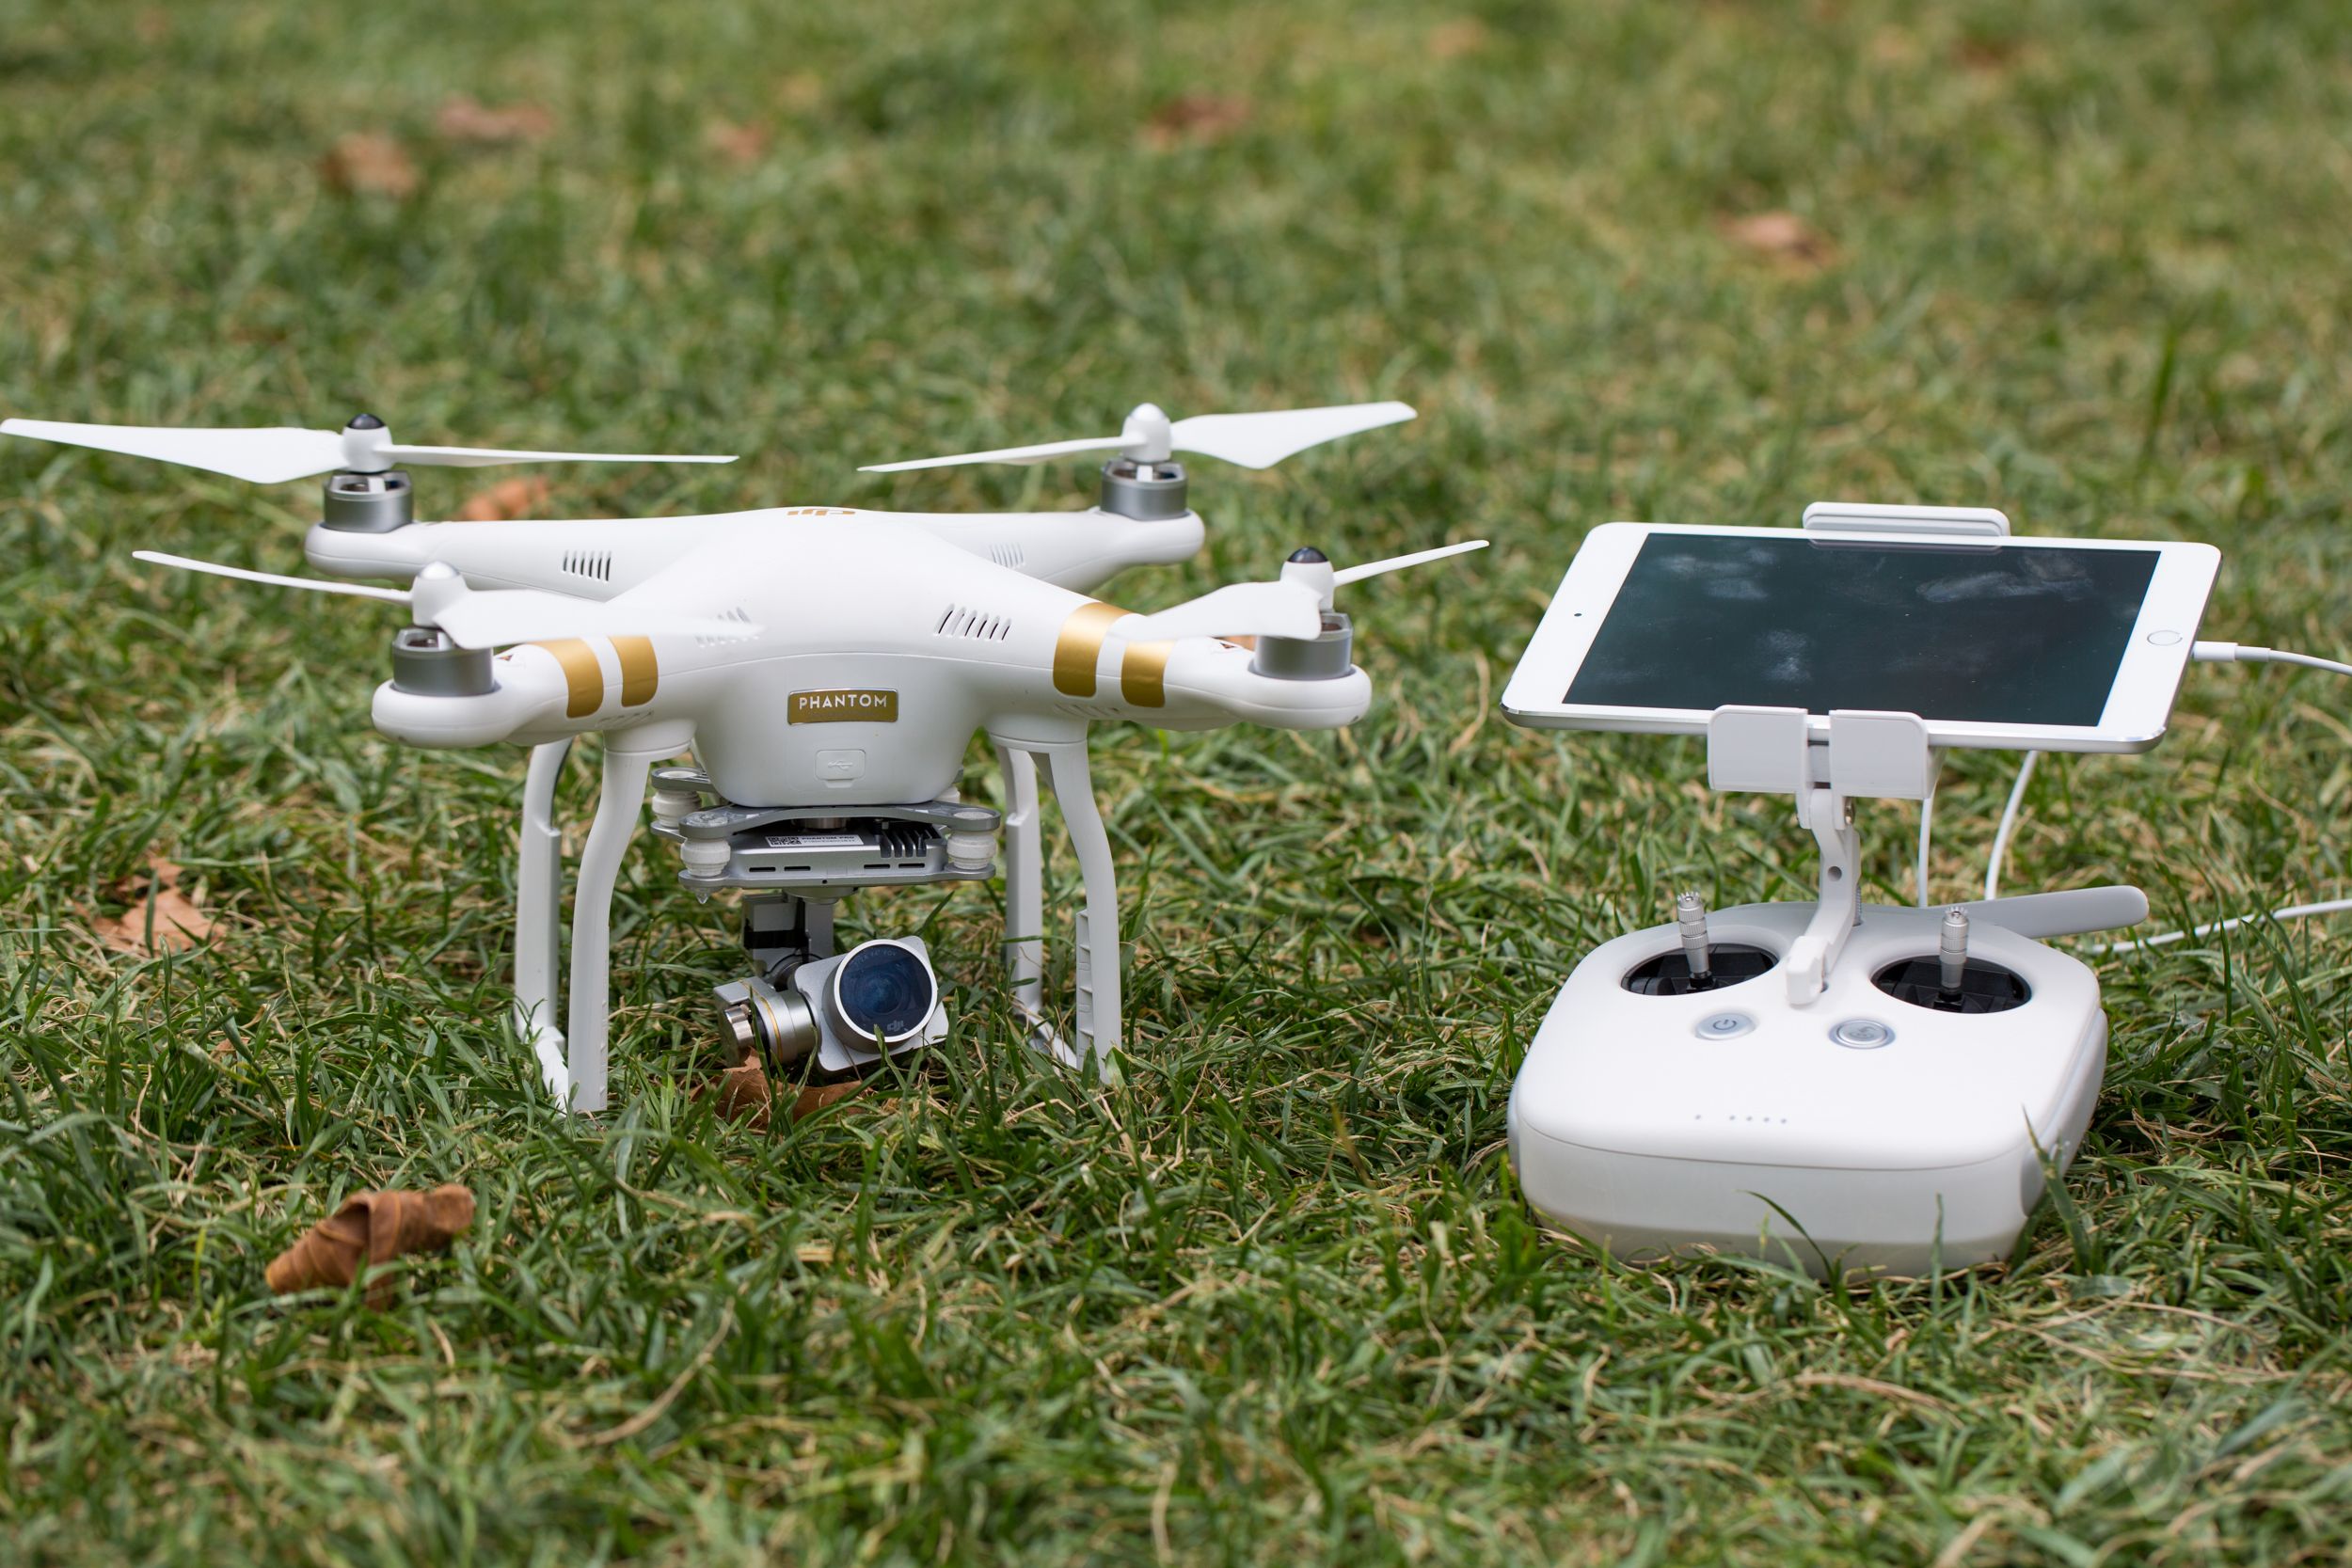 Rent the DJI Phantom Camera - Get Rental Costs from Video Production